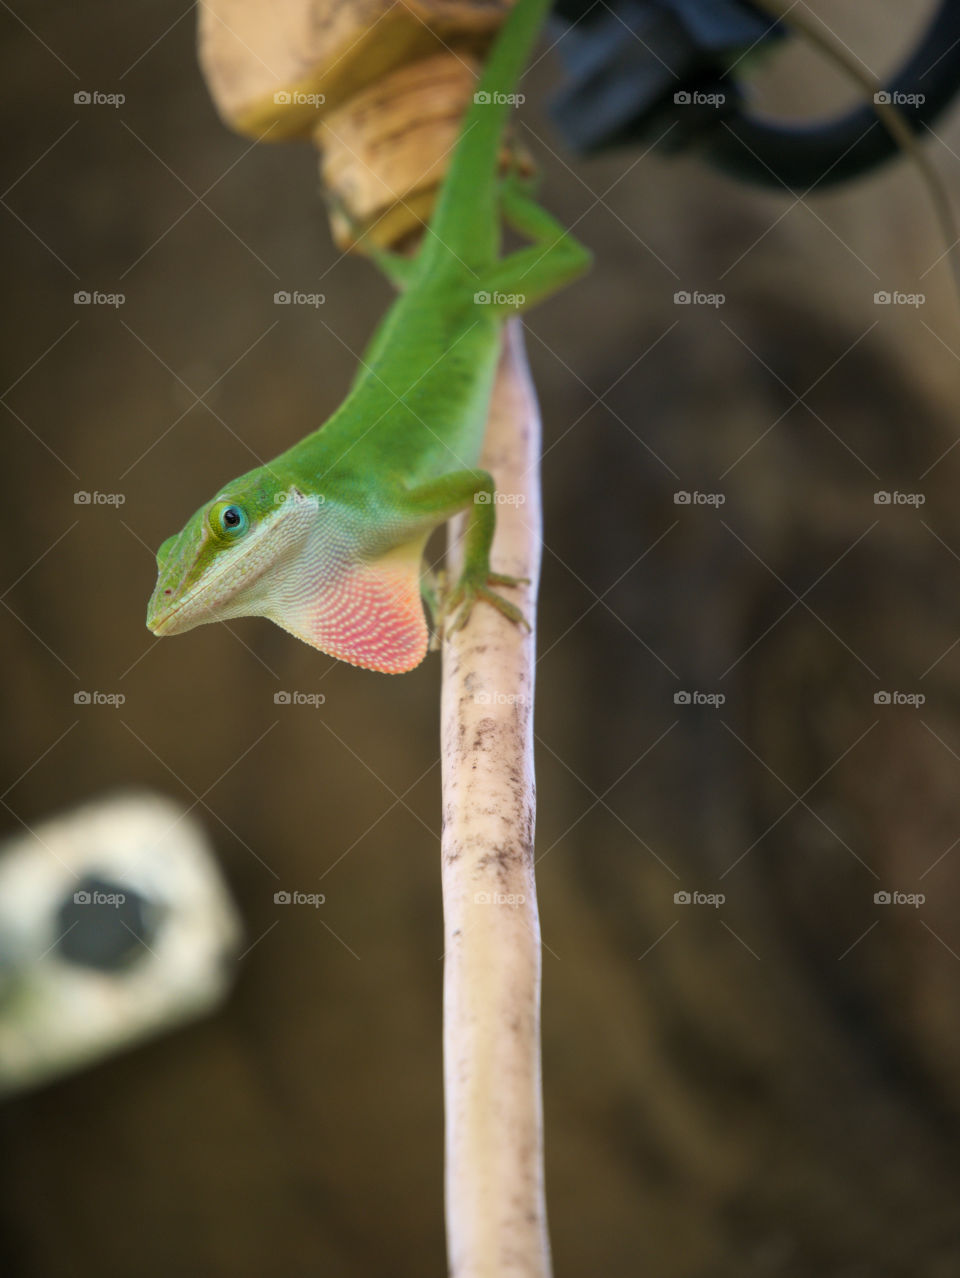 Male Green Anole Showing Off his Dewlap during Courtship Display while Perched on an Extension Cord